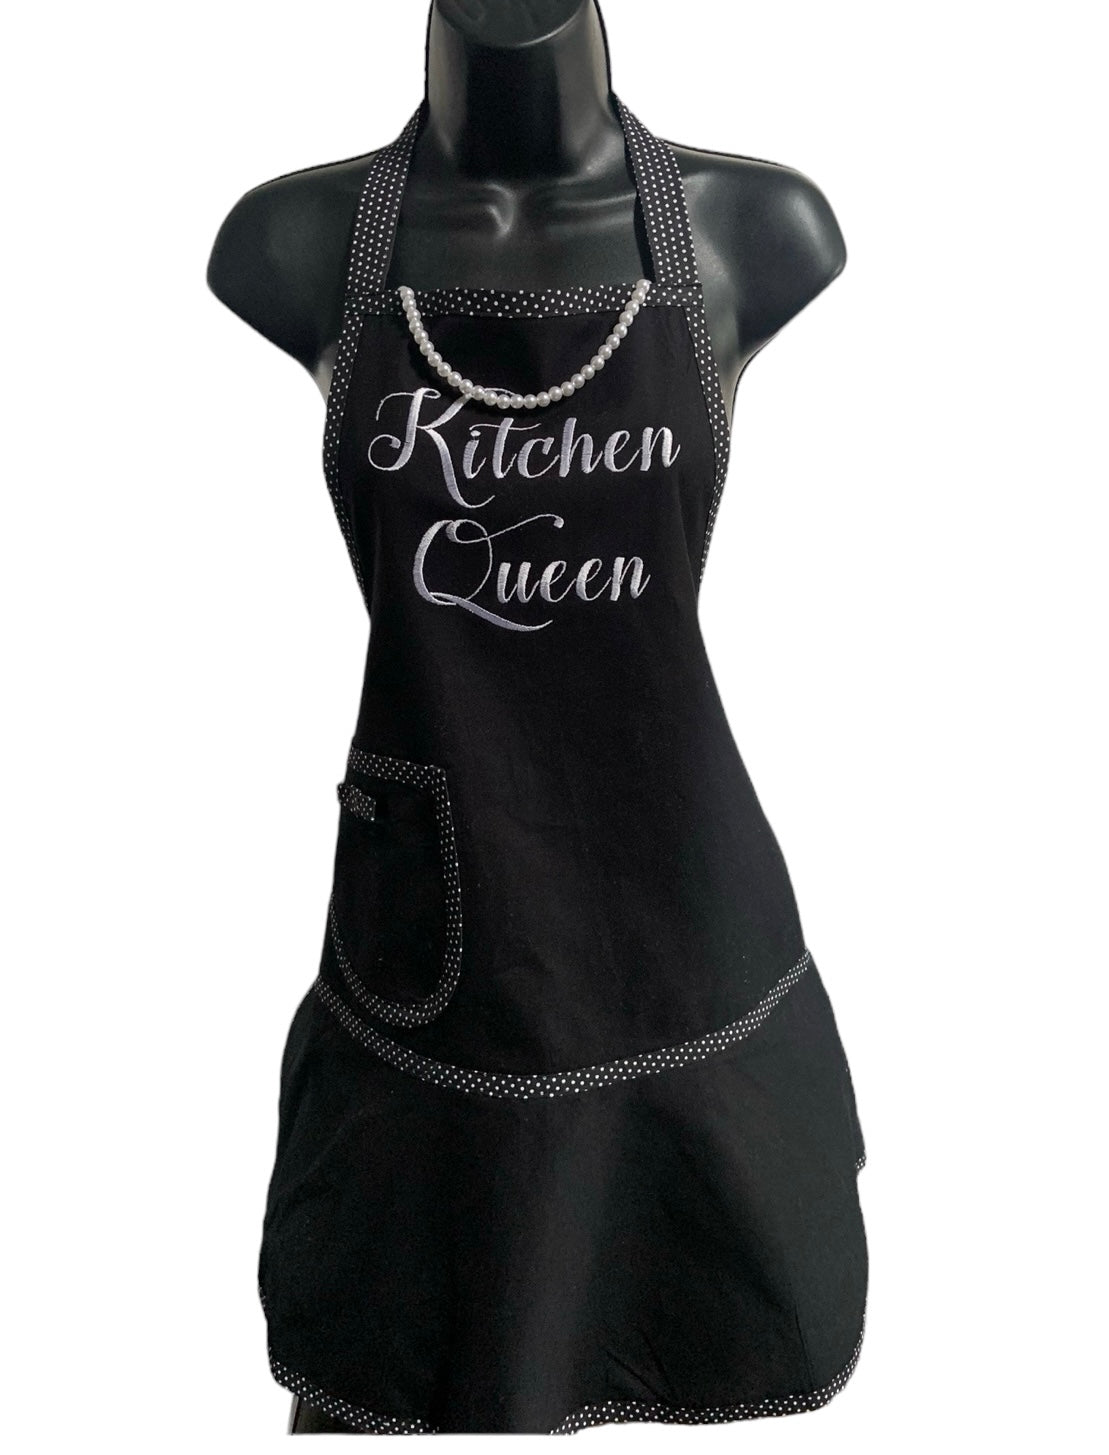 My Little Black Apron With Pearls- Kitchen Queen